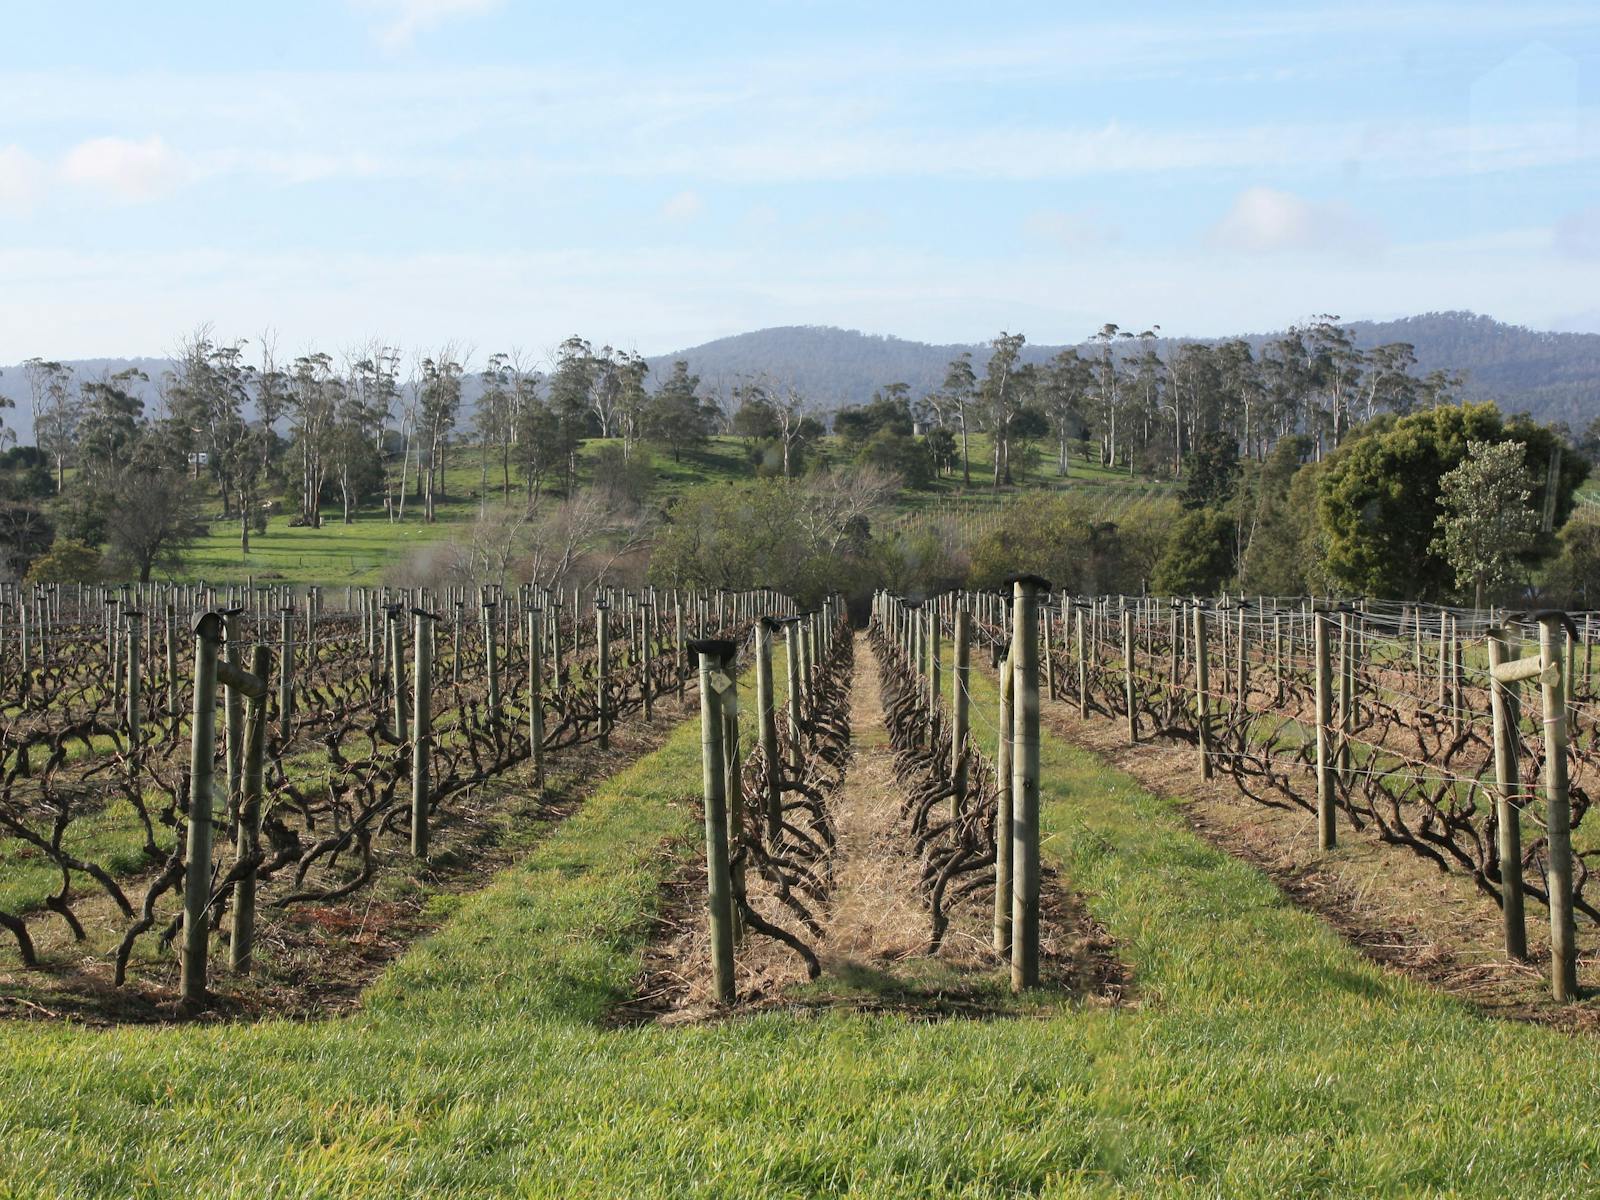 Pinot Grigio vines after pruning